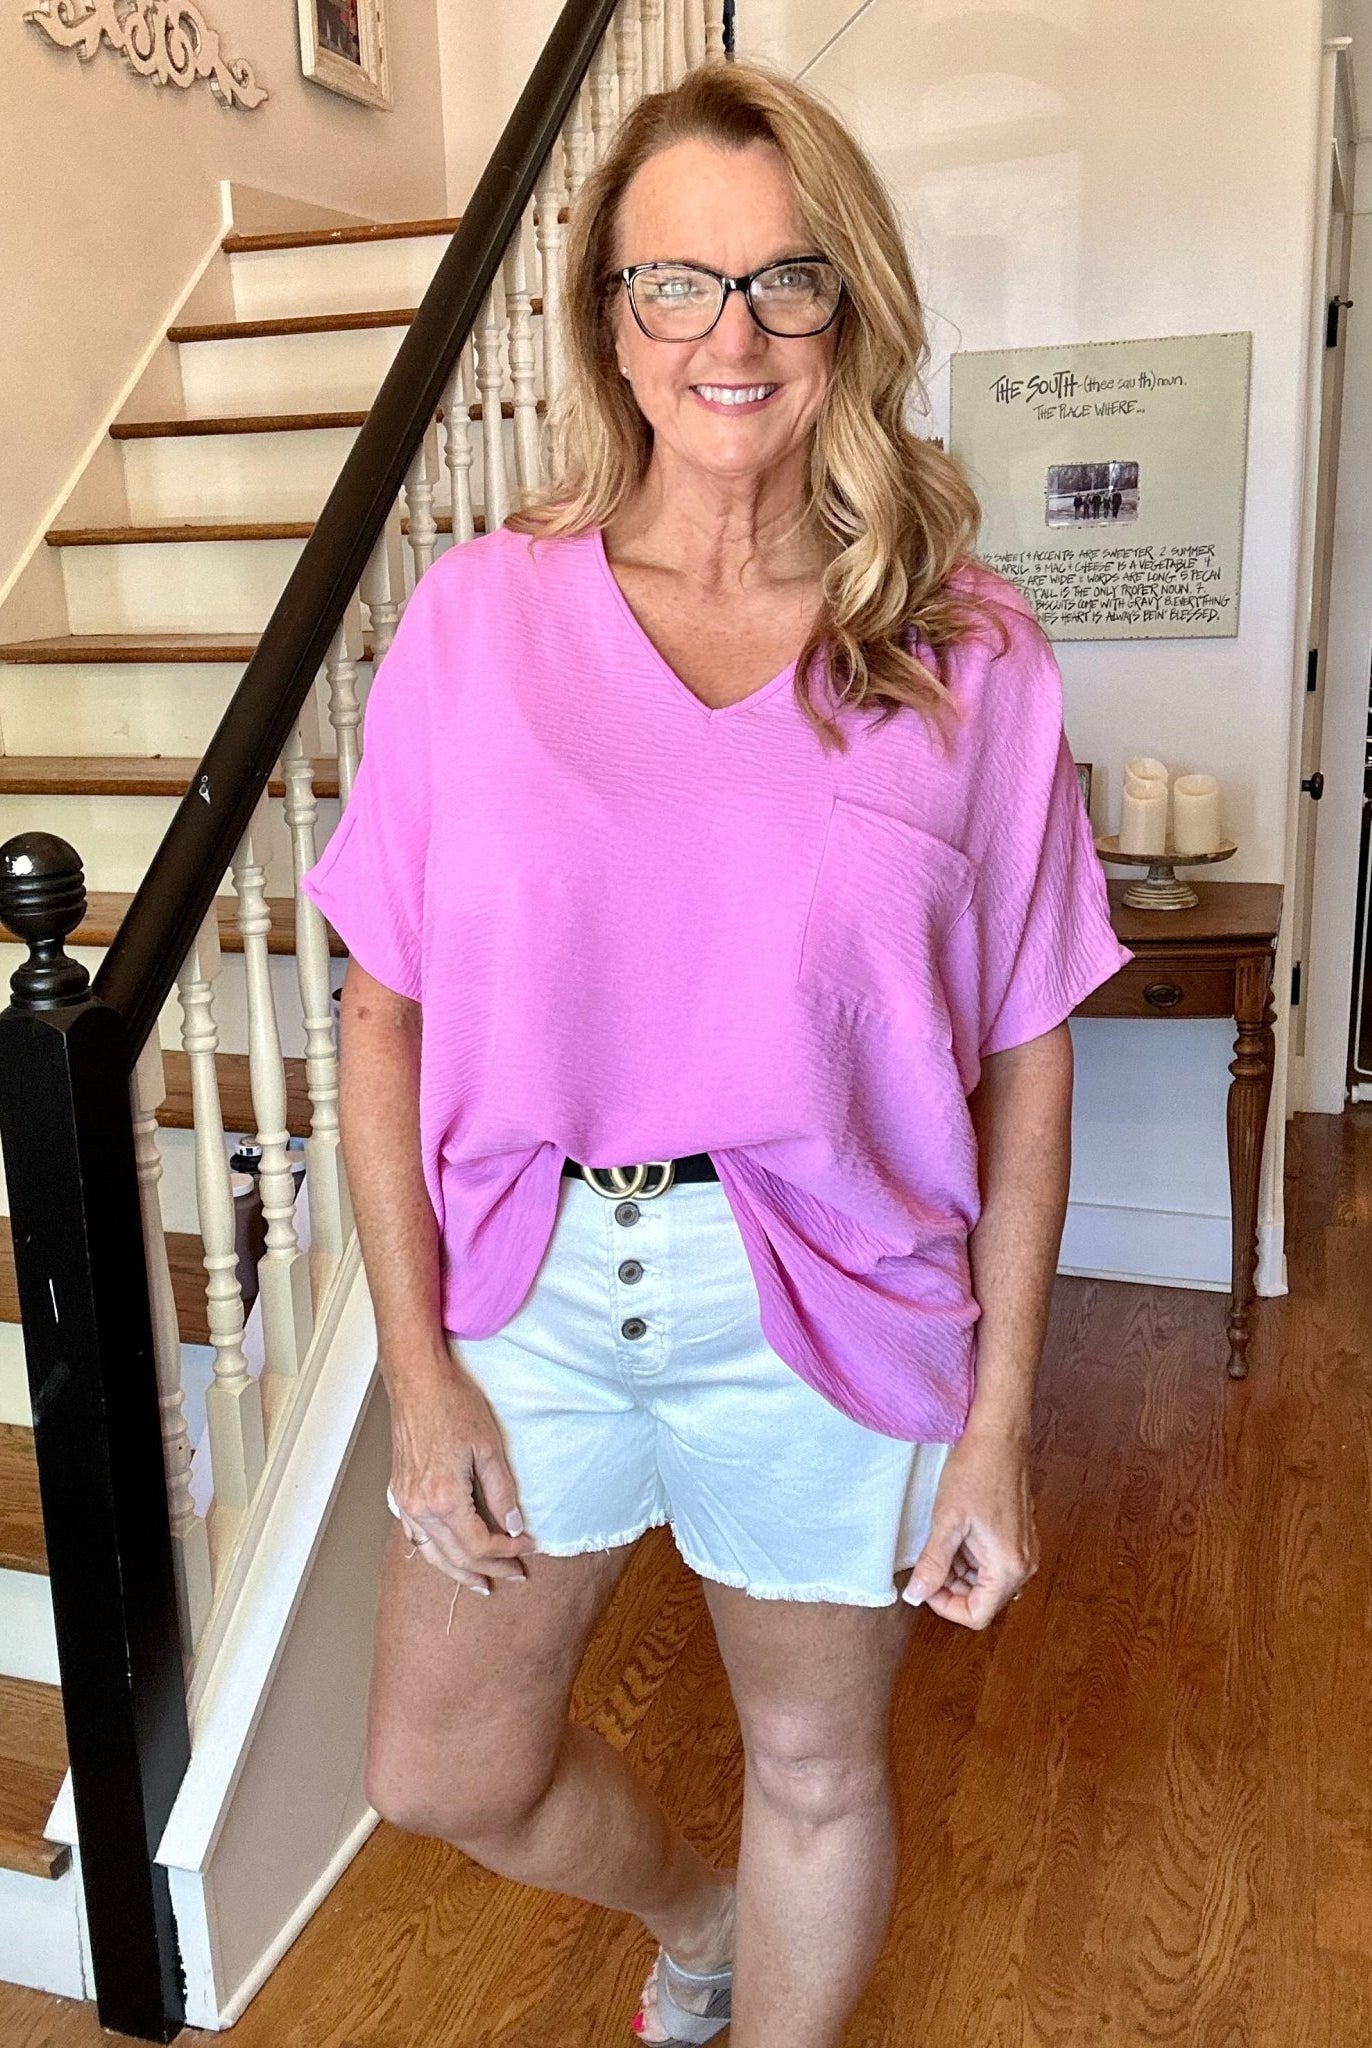 It Just Comes Natural V Neck Top - Mauve - -Jimberly's Boutique-Olive Branch-Mississippi